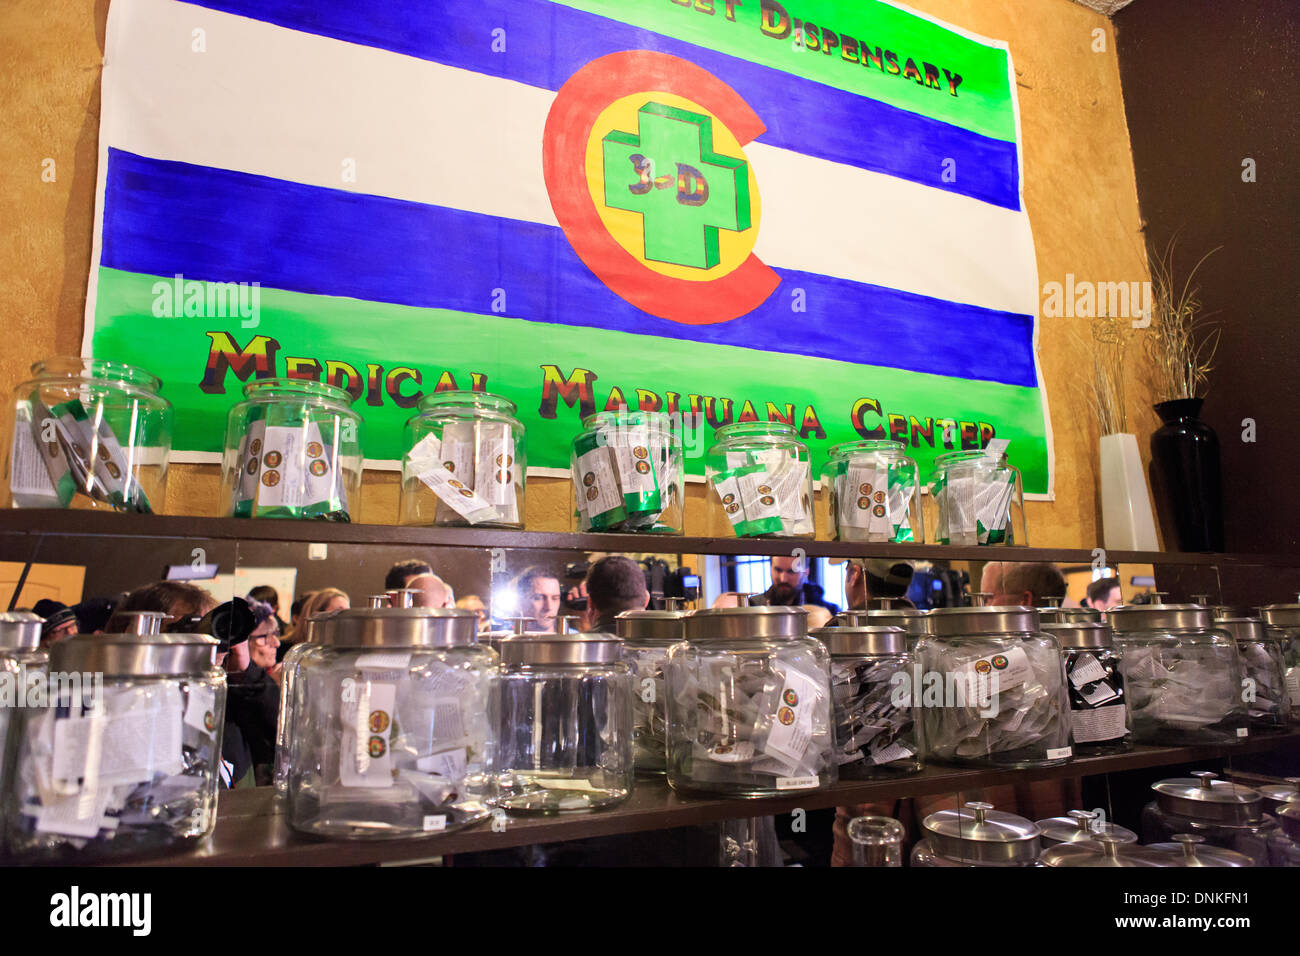 Denver, Colorado USA 1 Jan 2014 – Jars filled with packets of retail marijuana await sale at the 3-D Cannabis dispensary on the first day of legalization in Colorado. Credit:  Ed Endicott/Alamy Live News Stock Photo